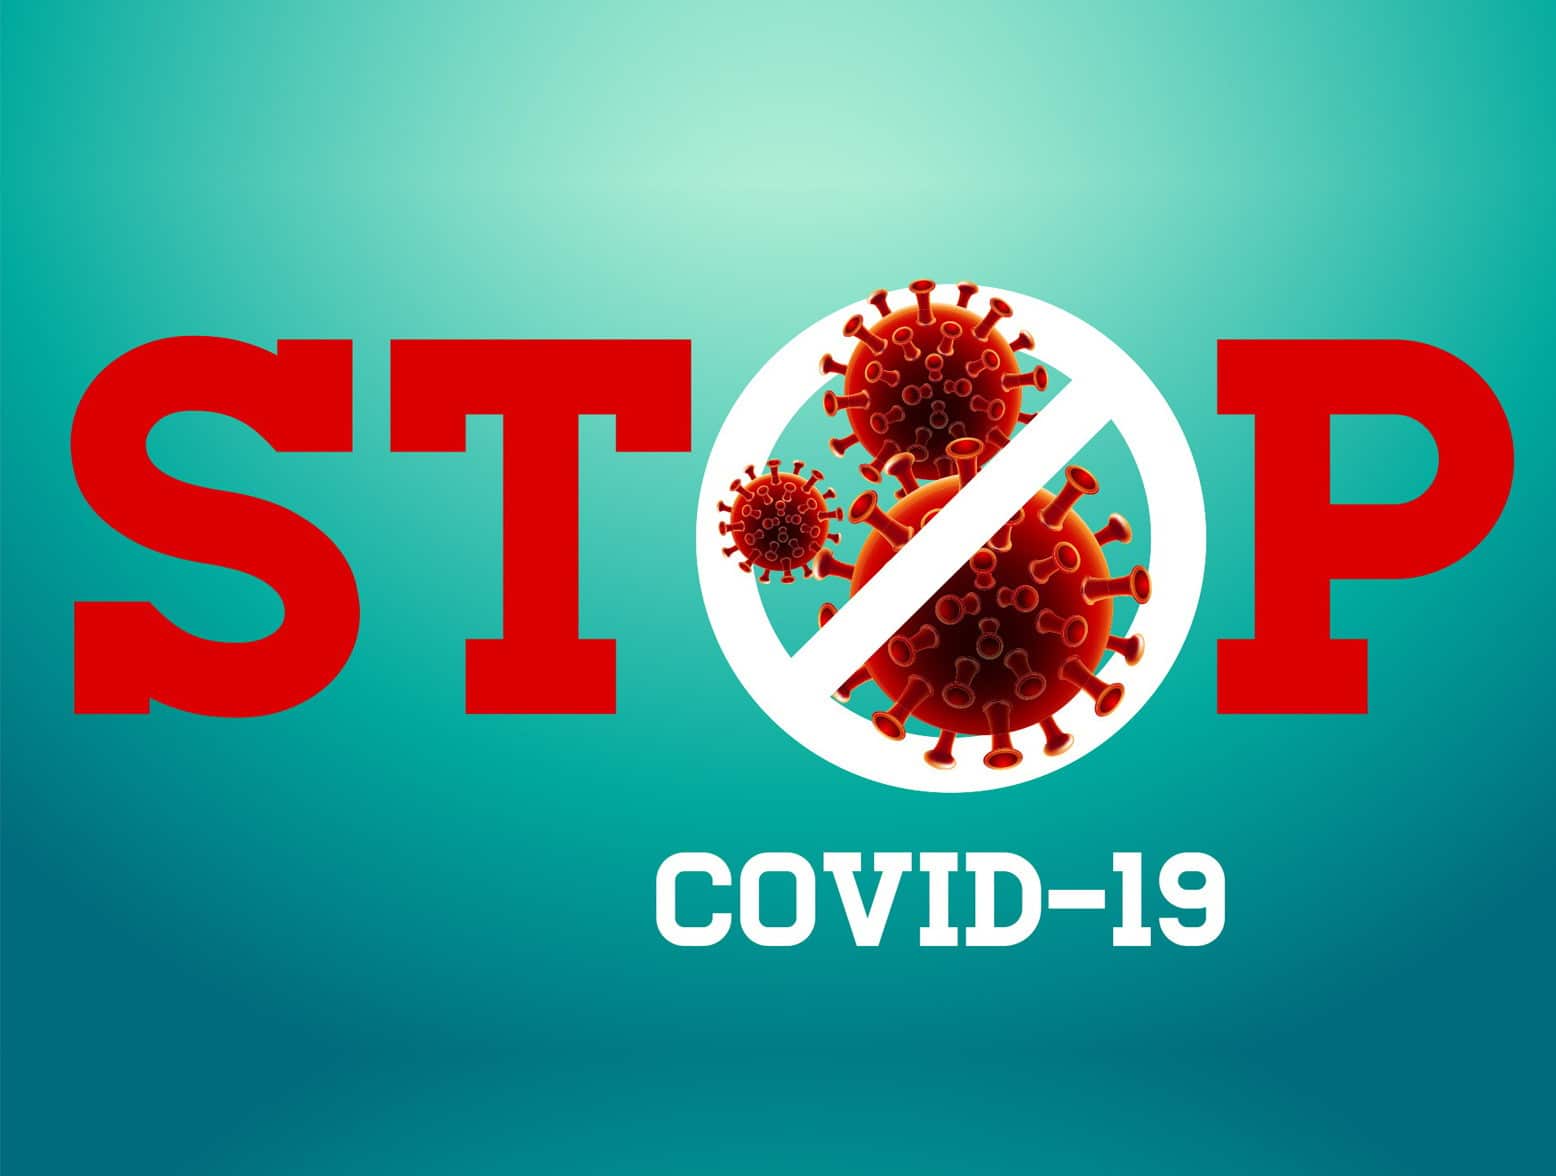 Stop Covid-19 Video Challenge launched